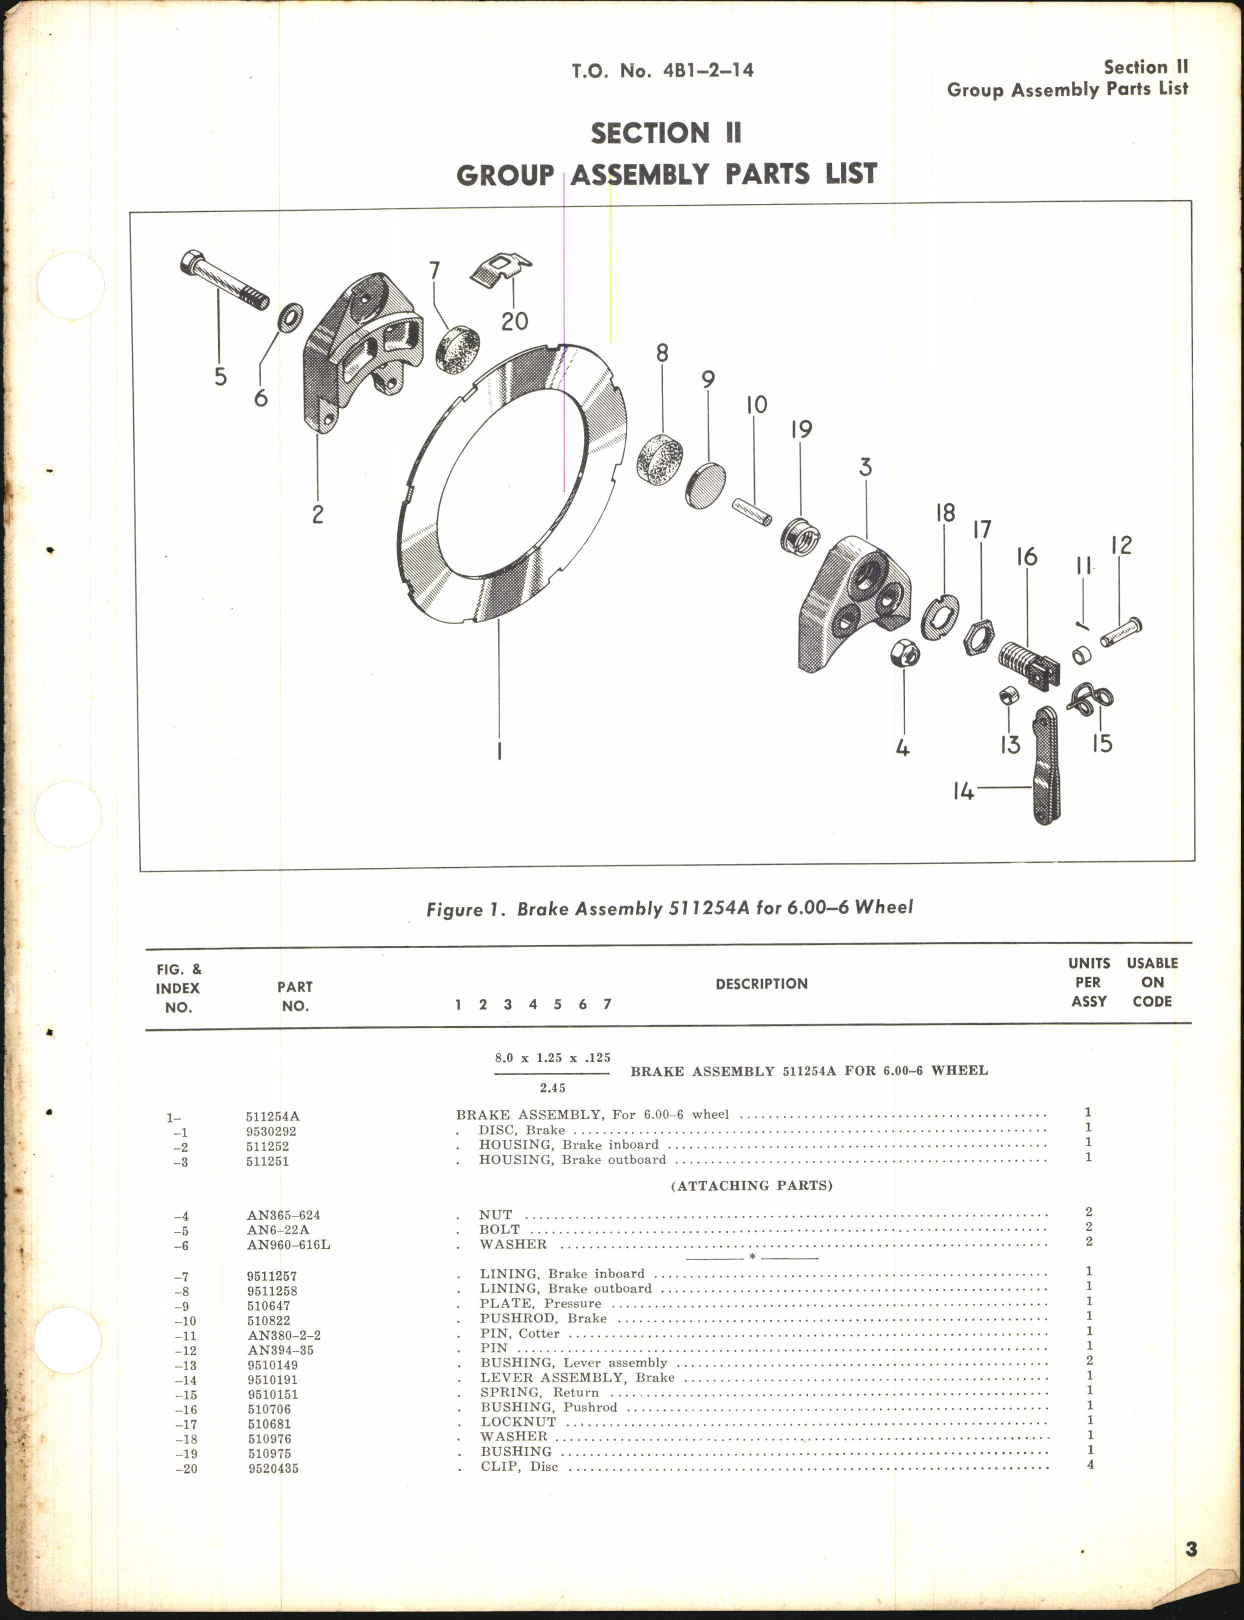 Sample page 7 from AirCorps Library document: Illustrated Parts Breakdown for Single and Dual Disc Brakes (Goodyear)